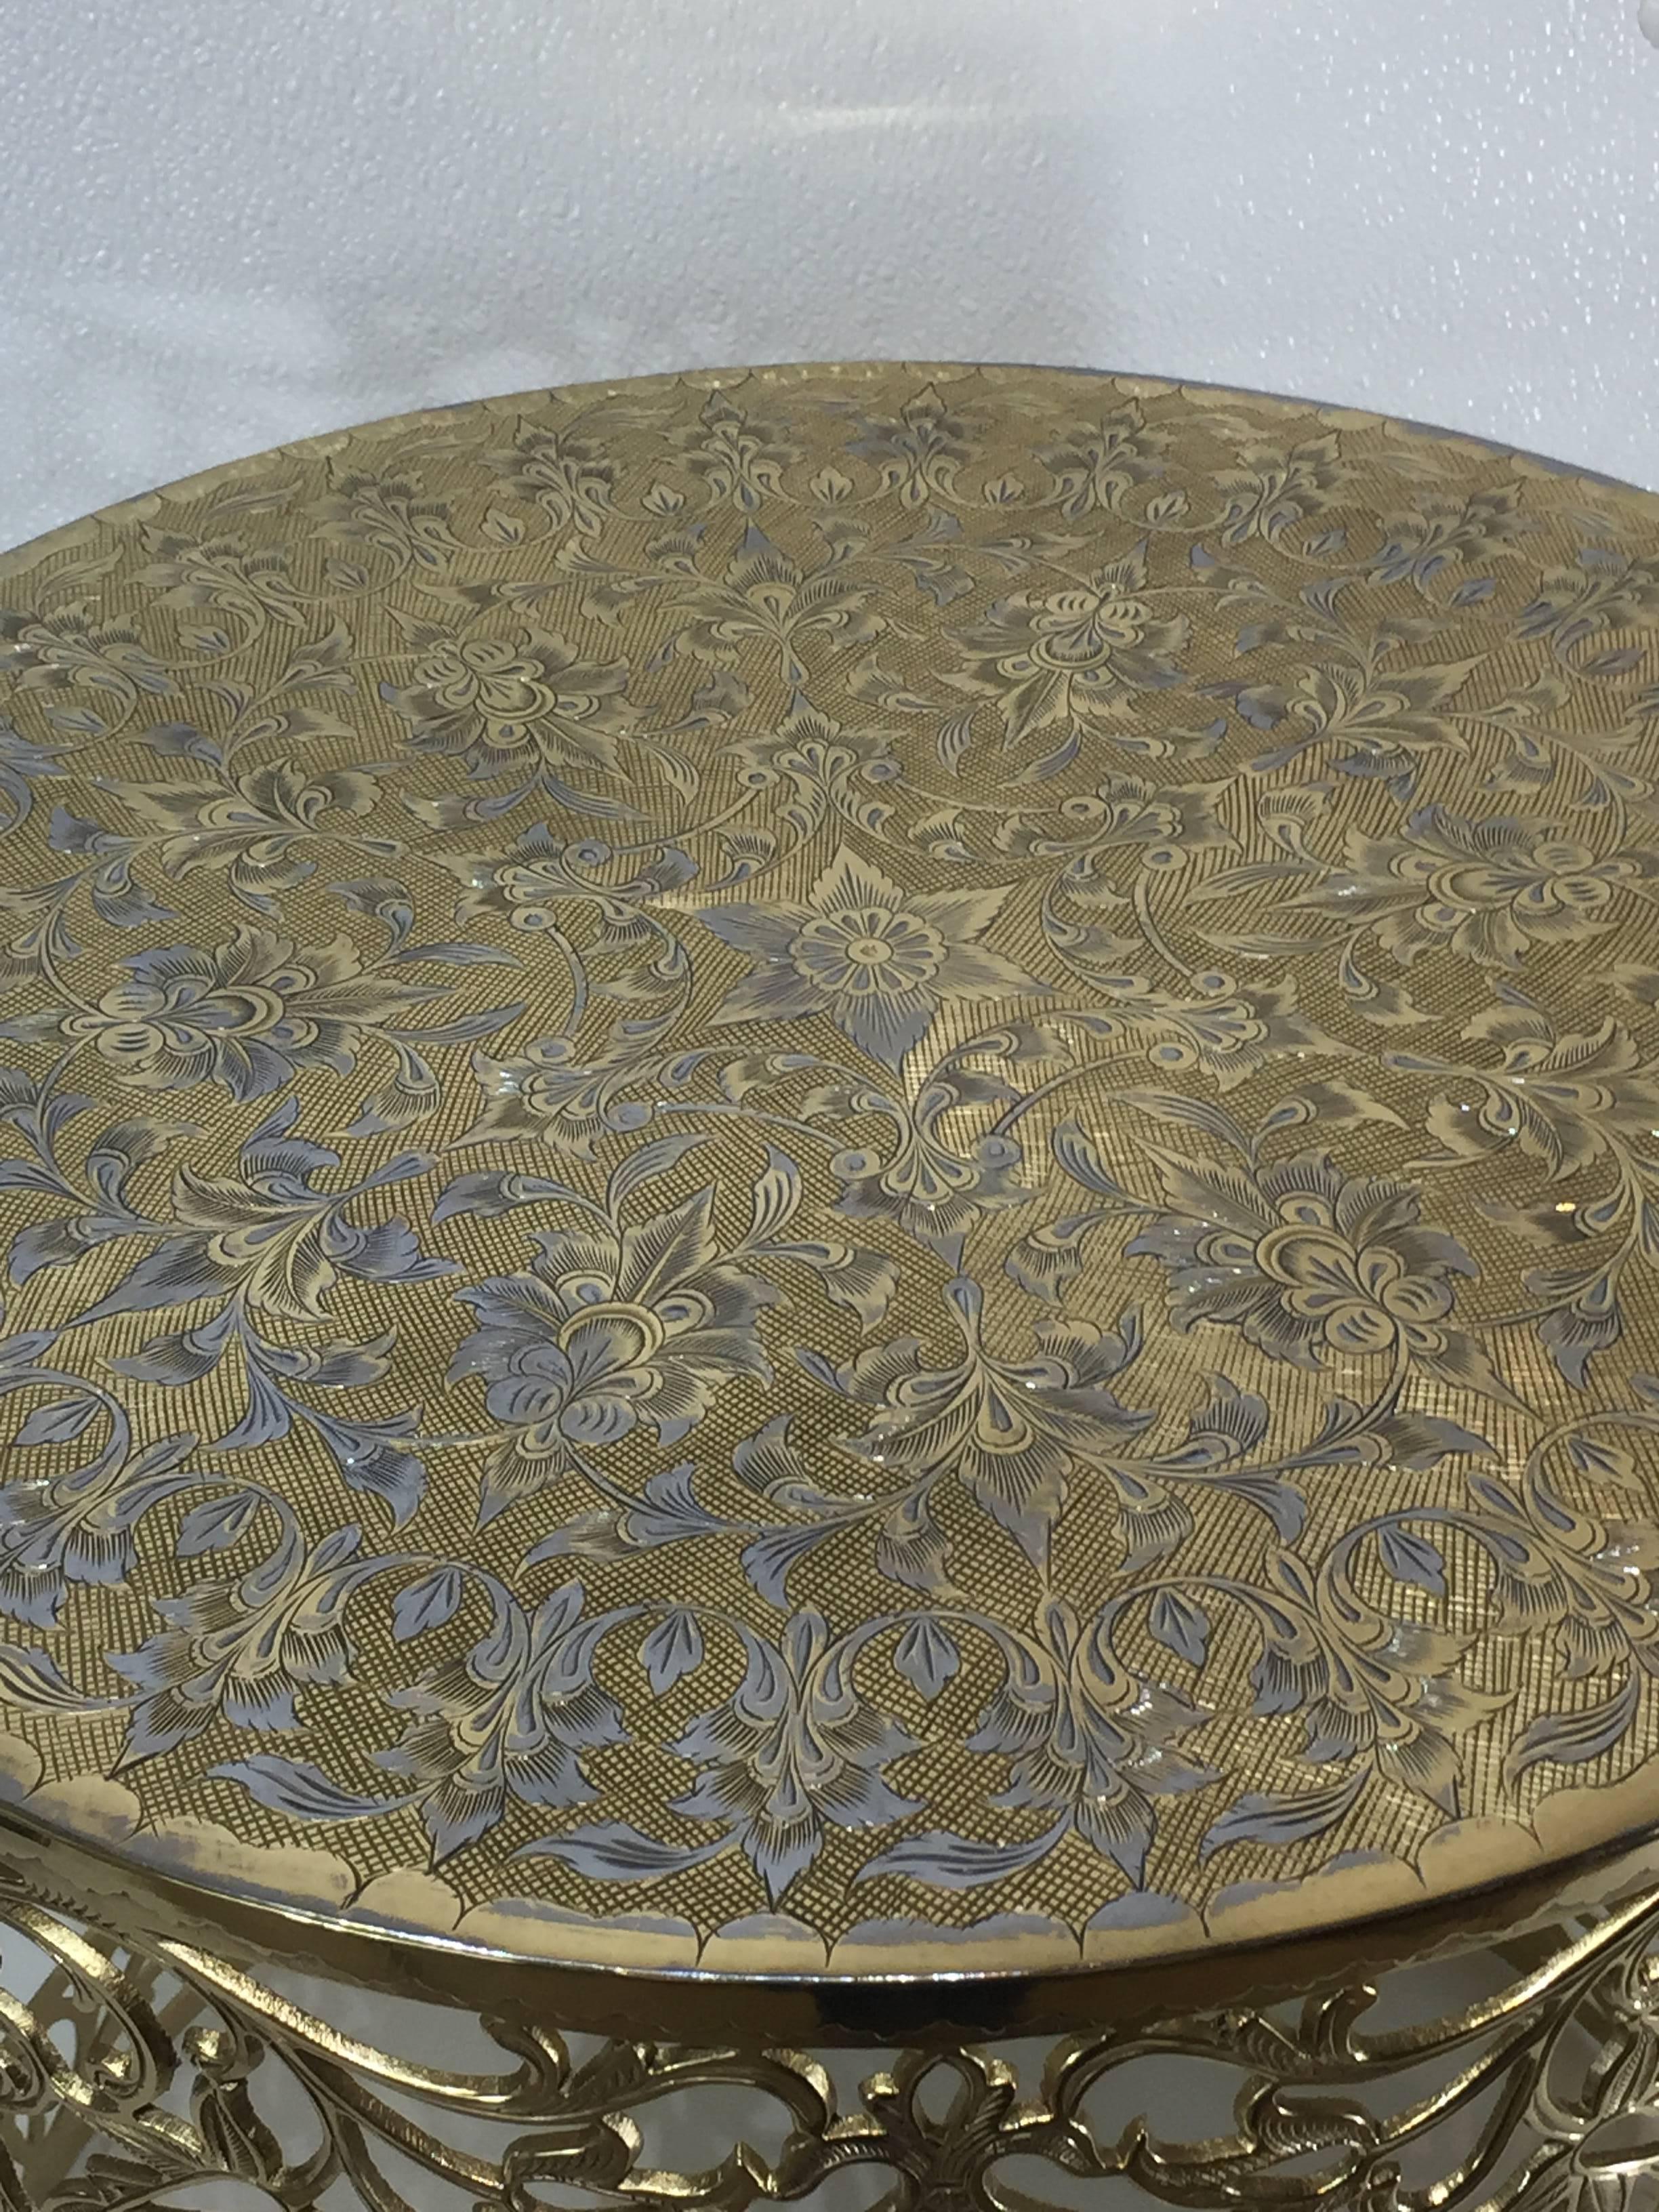 Syrian brass garden seat with silver inlay, of circular form with intricate casting and engraving.